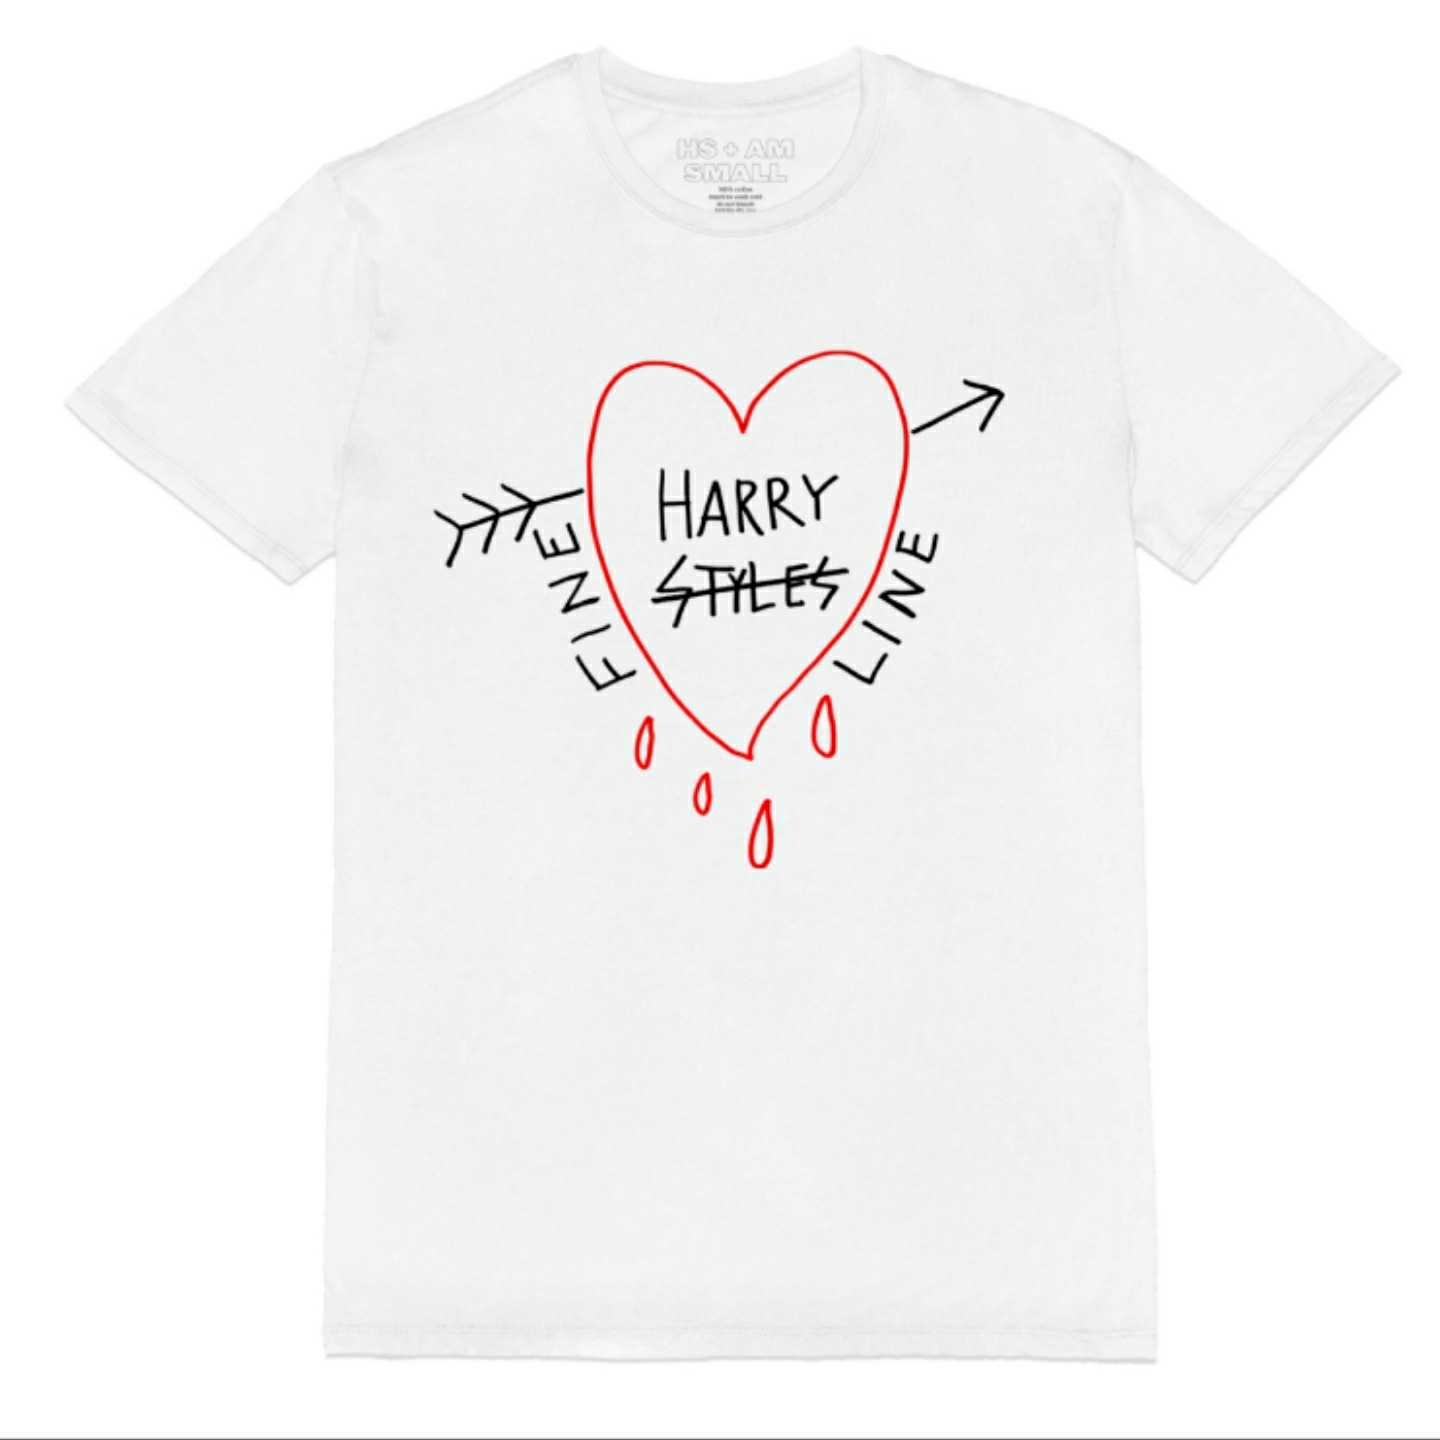 T-SHIRT, LIMITED EDITION, GUCCI, ALESSANDRO MICHELE , Harry Styles, 360 MAGAZINE